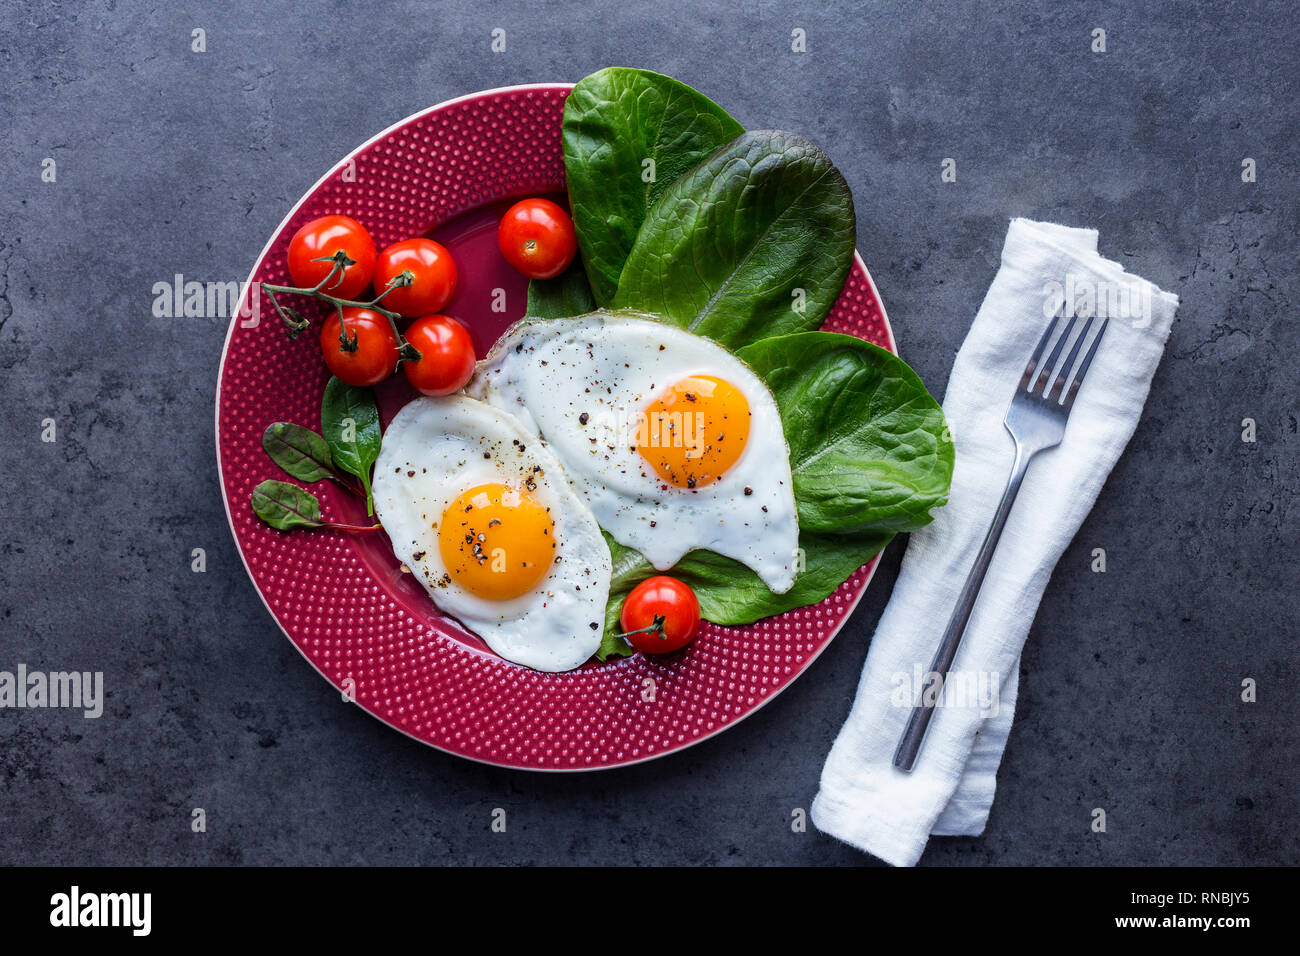 Serving plate with fried eggs, salad and tomatoes, fork and napkin at black background. View from above, cover for magazine Stock Photo